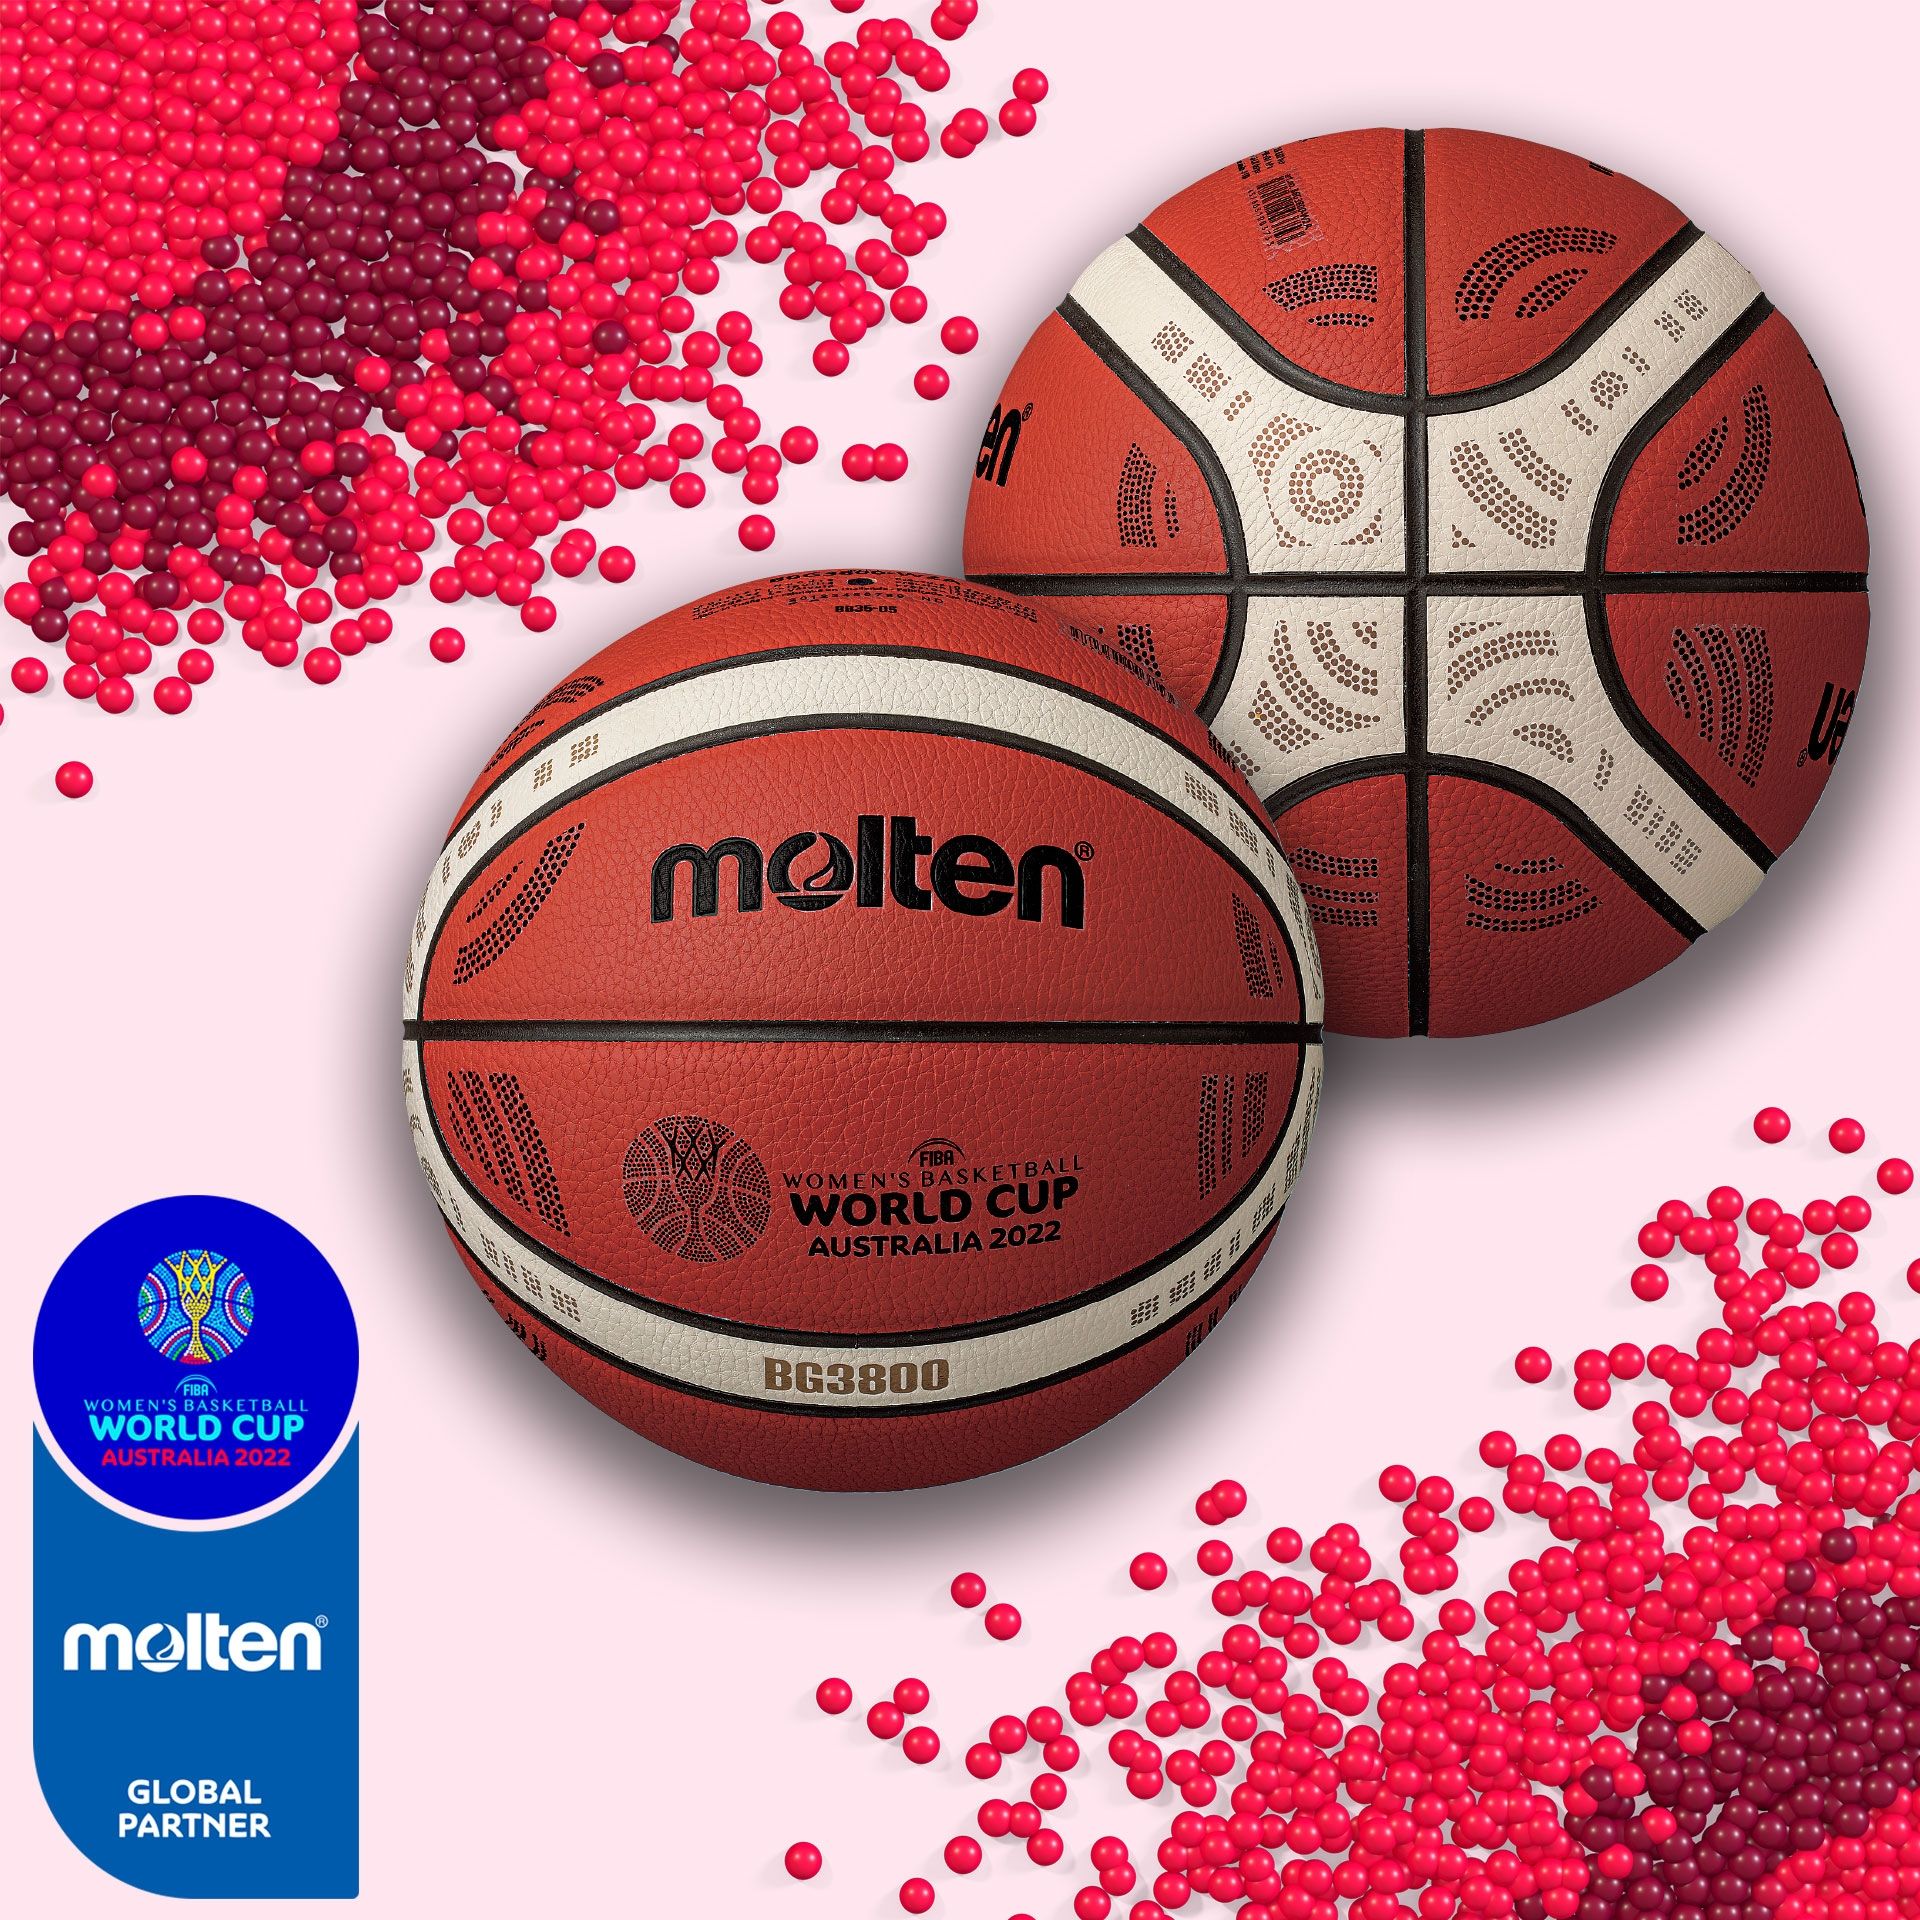 BG3800 Basketball 12 Panal Composite Leather (Indoor)